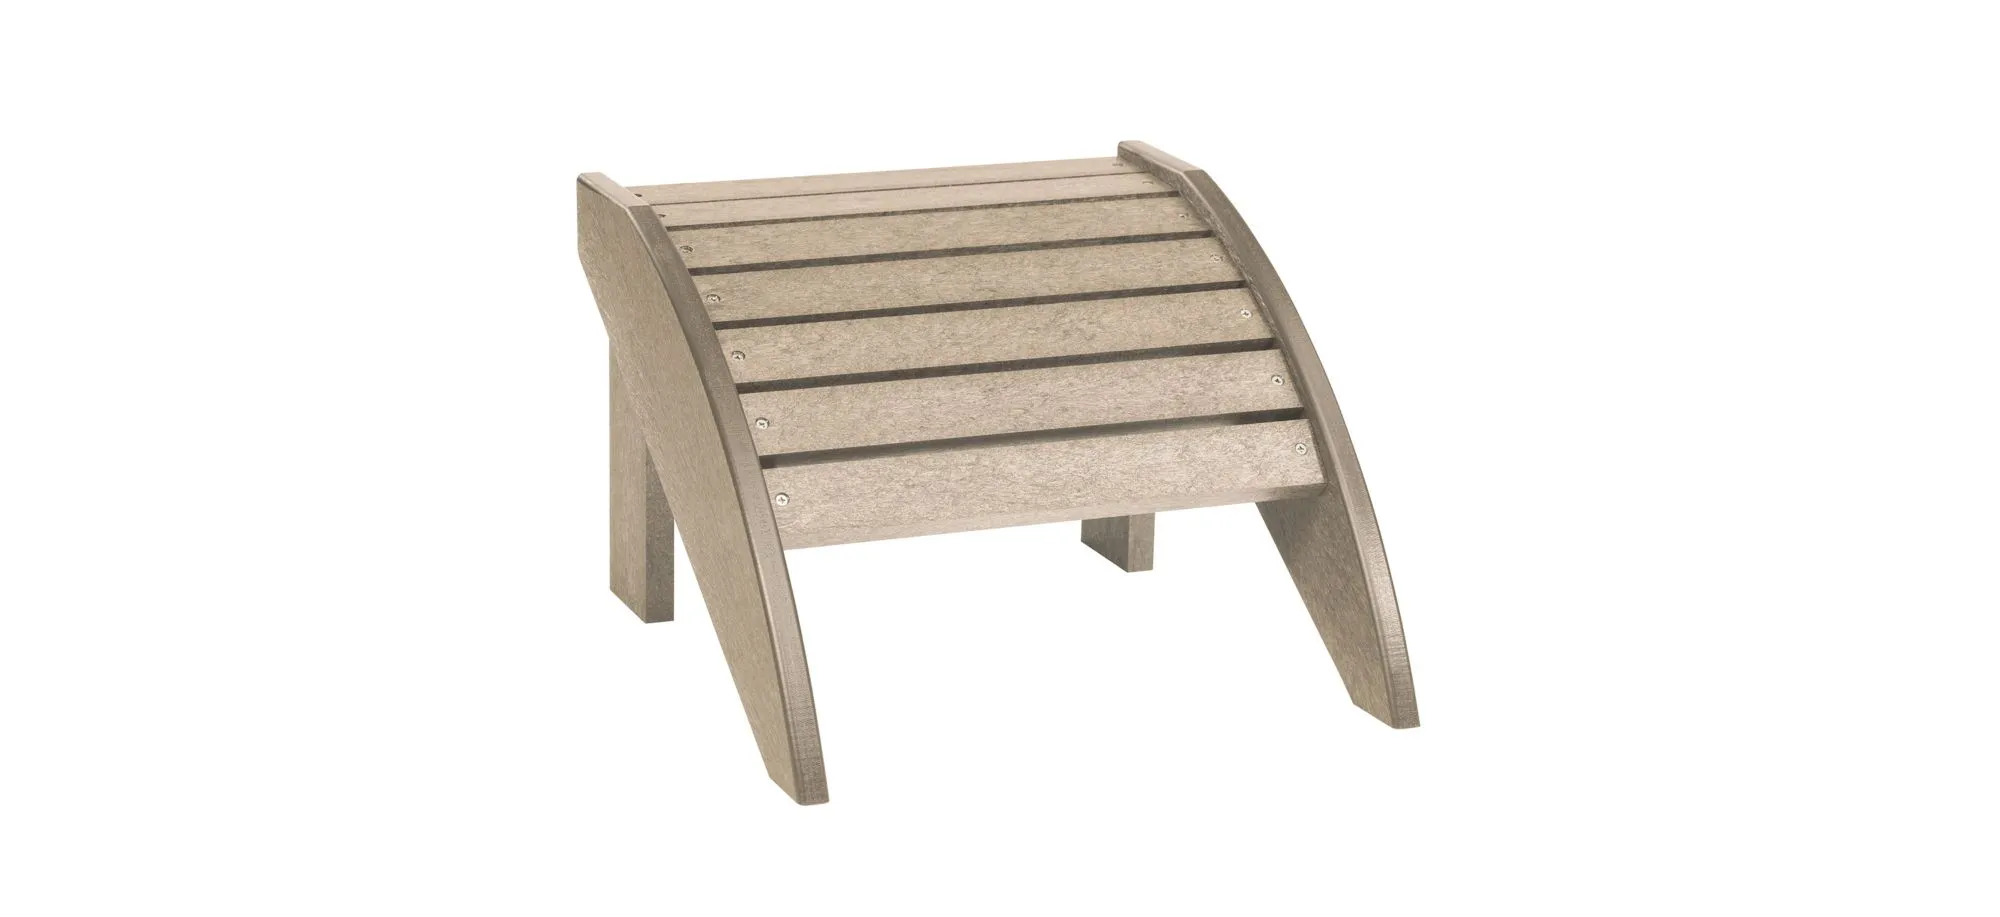 Generation Recycled Outdoor Adirondack Footstool in Beige by C.R. Plastic Products